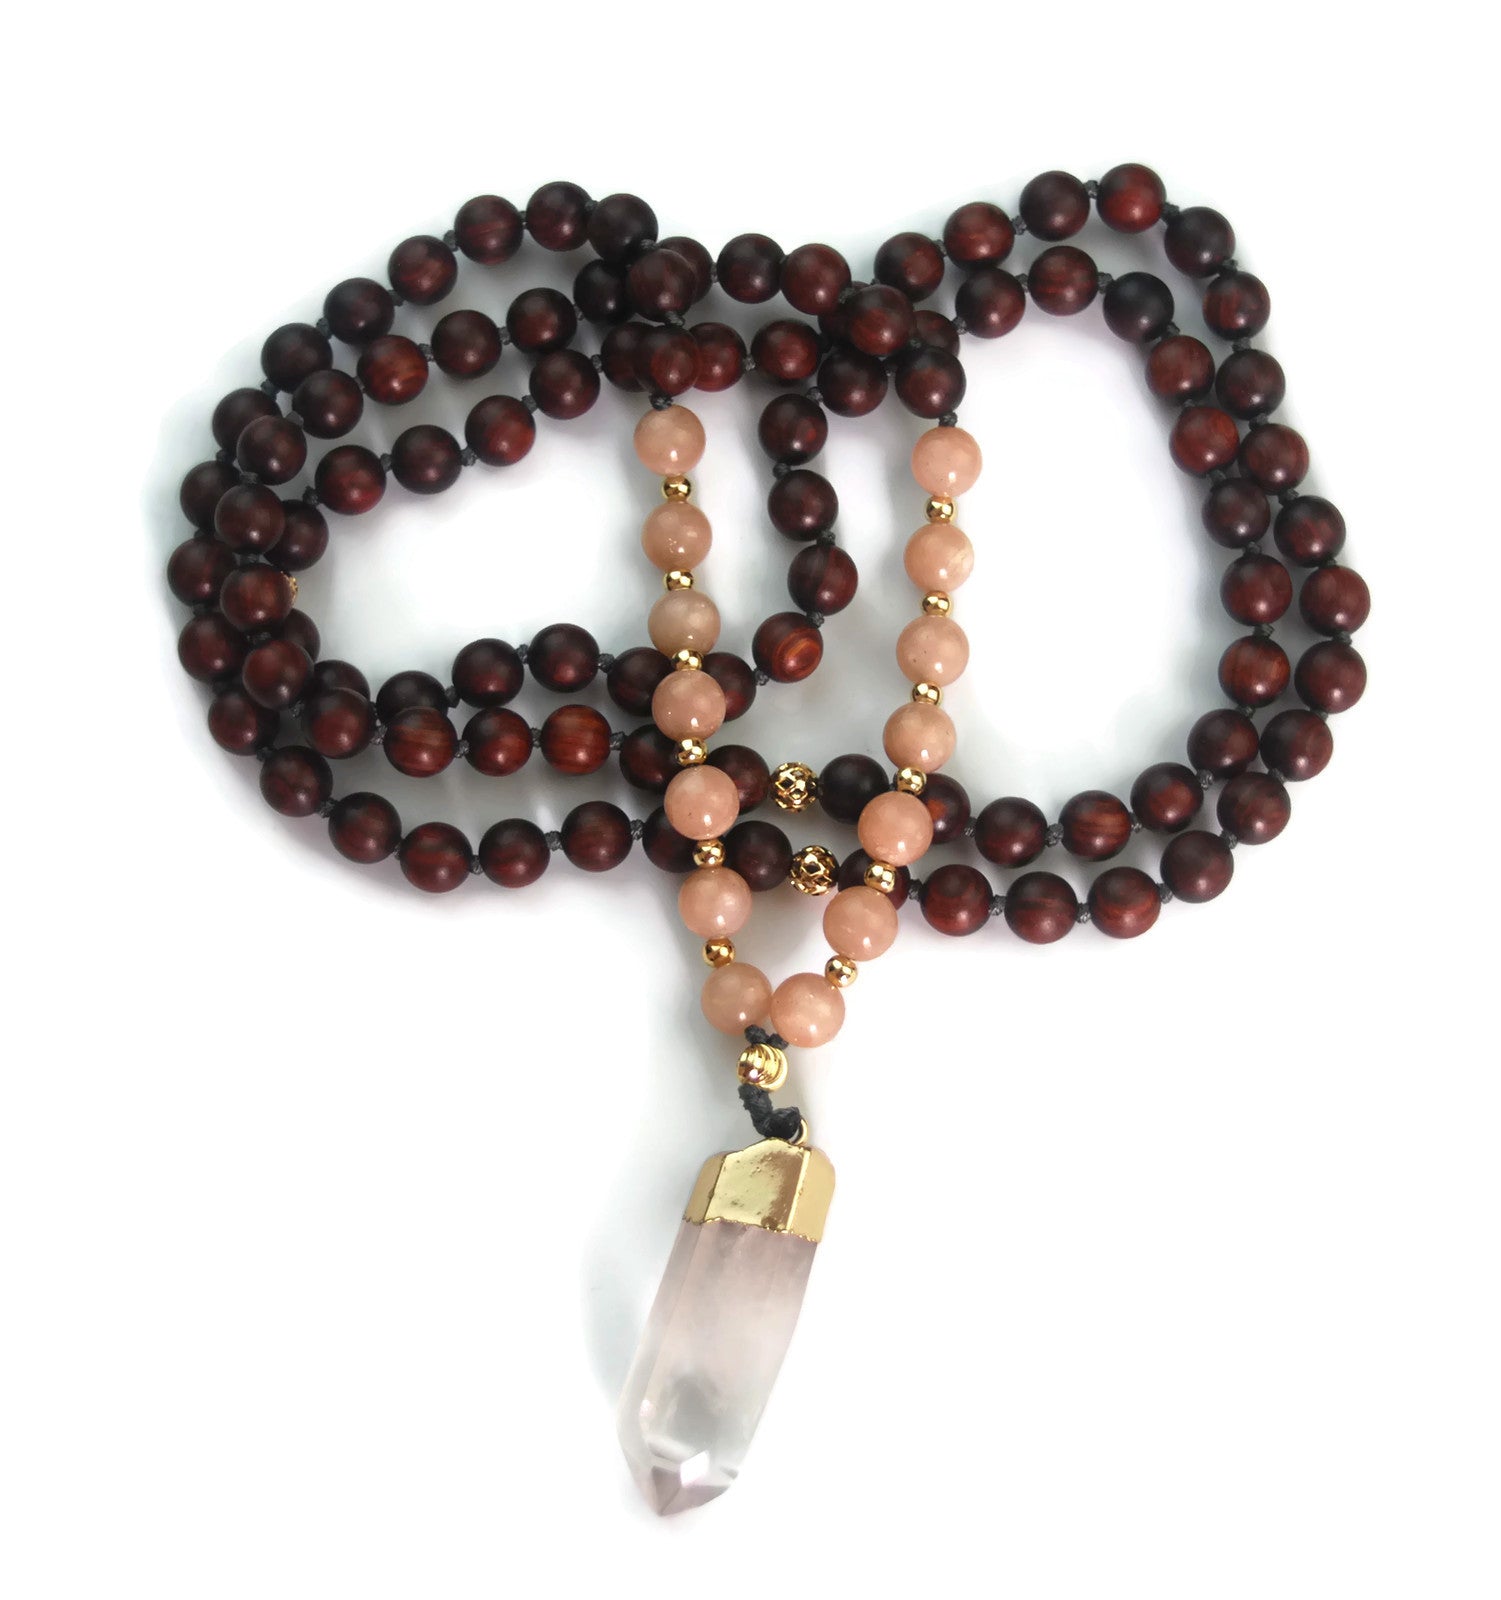 Where does the word MALA come from ?